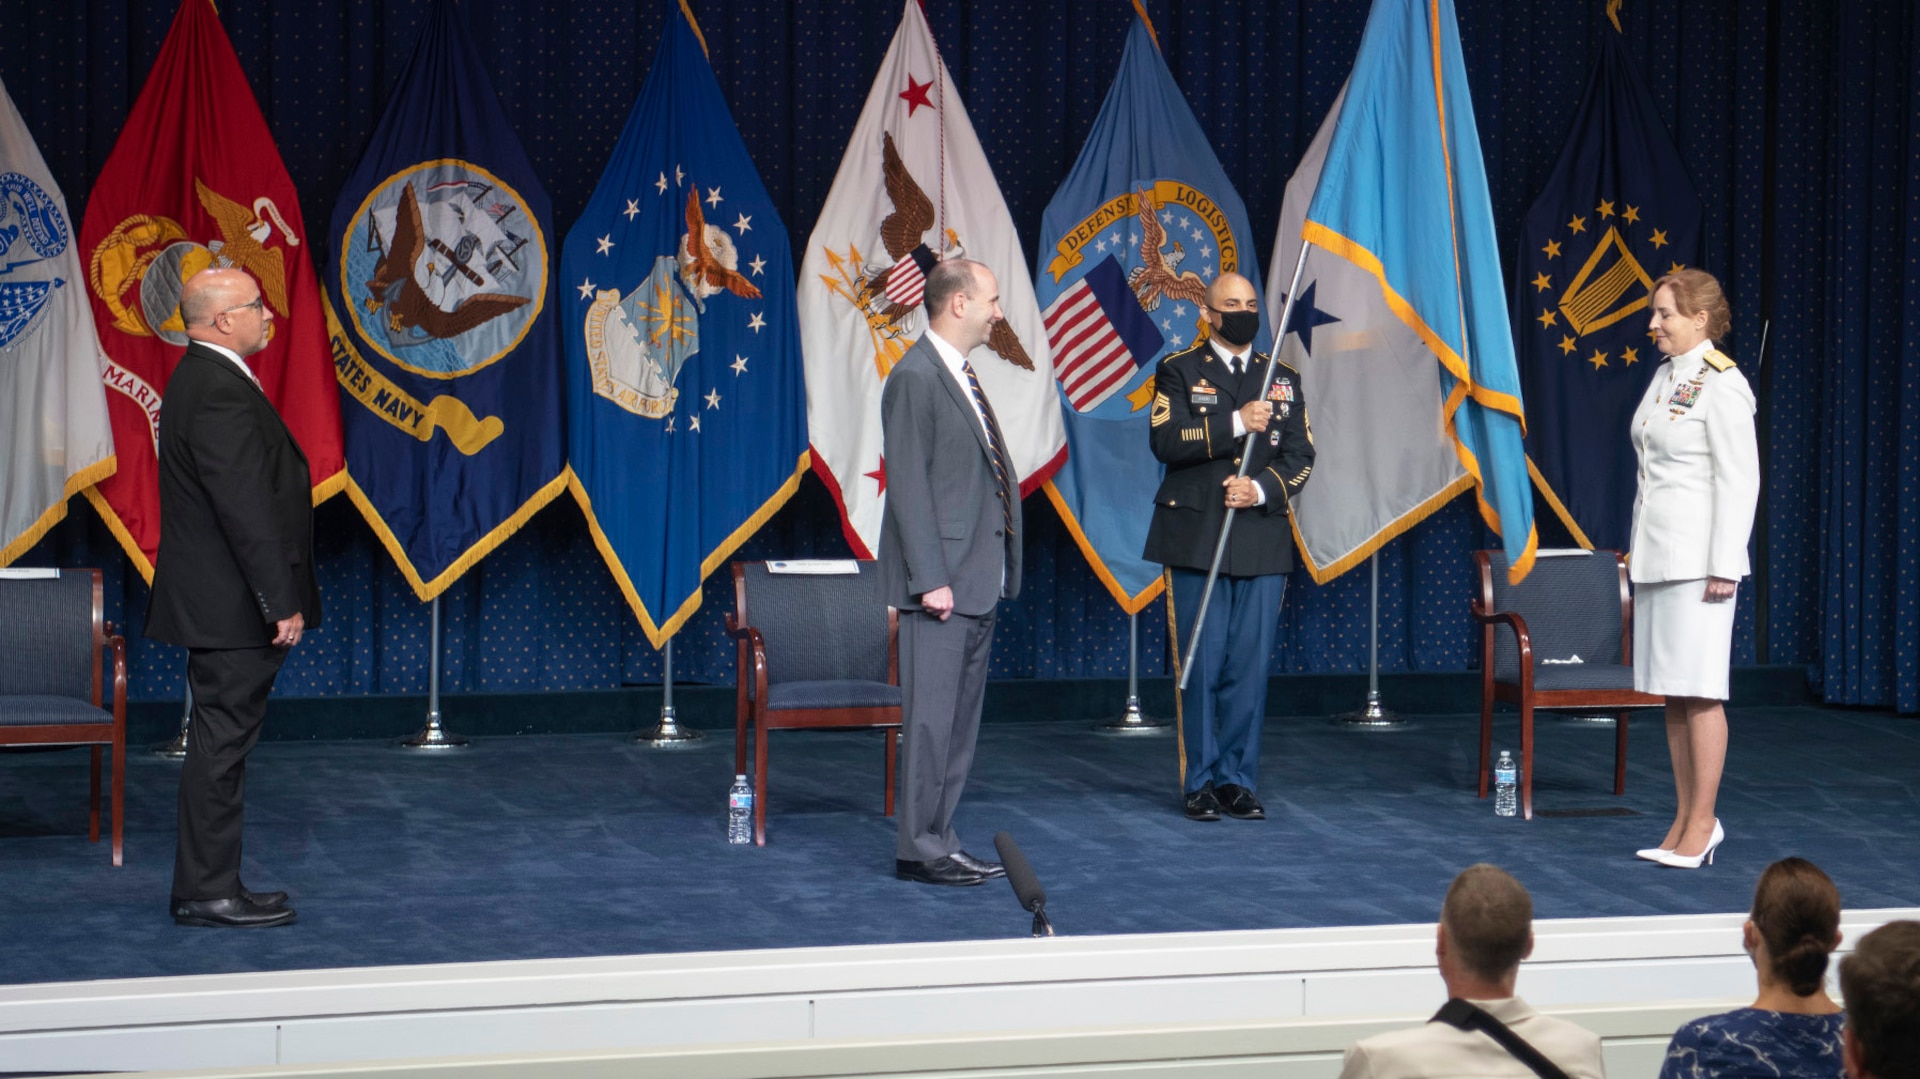 Two men in suits, a uniformed soldier and a woman in a Navy dress uniform stand on a stage with flags representing DLA and the military services.